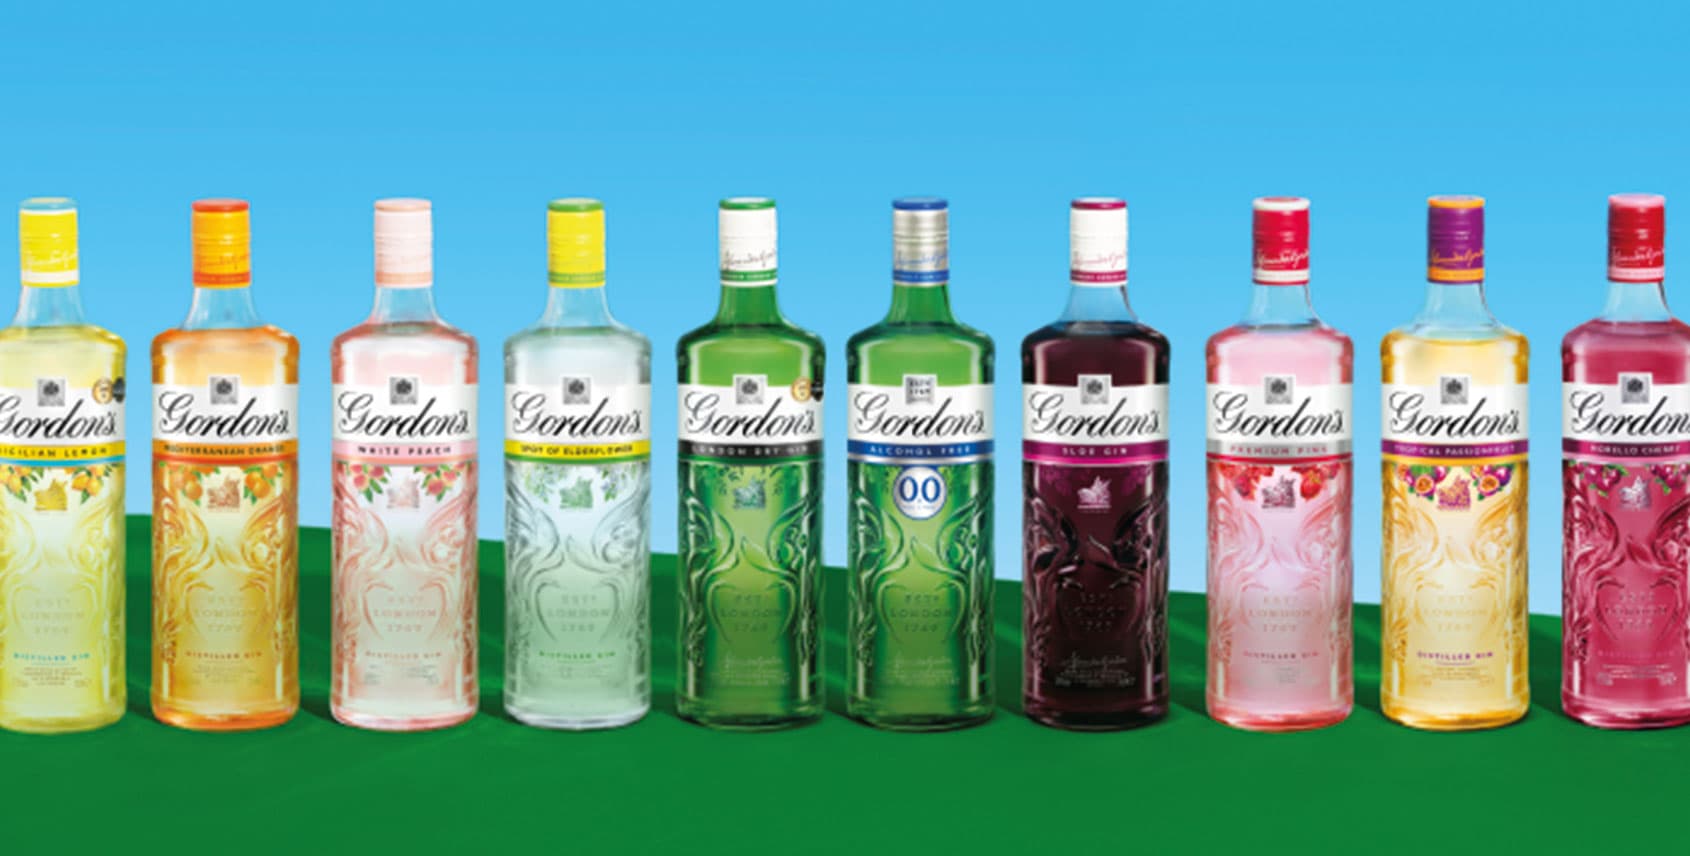 collection of Gordon's Gins